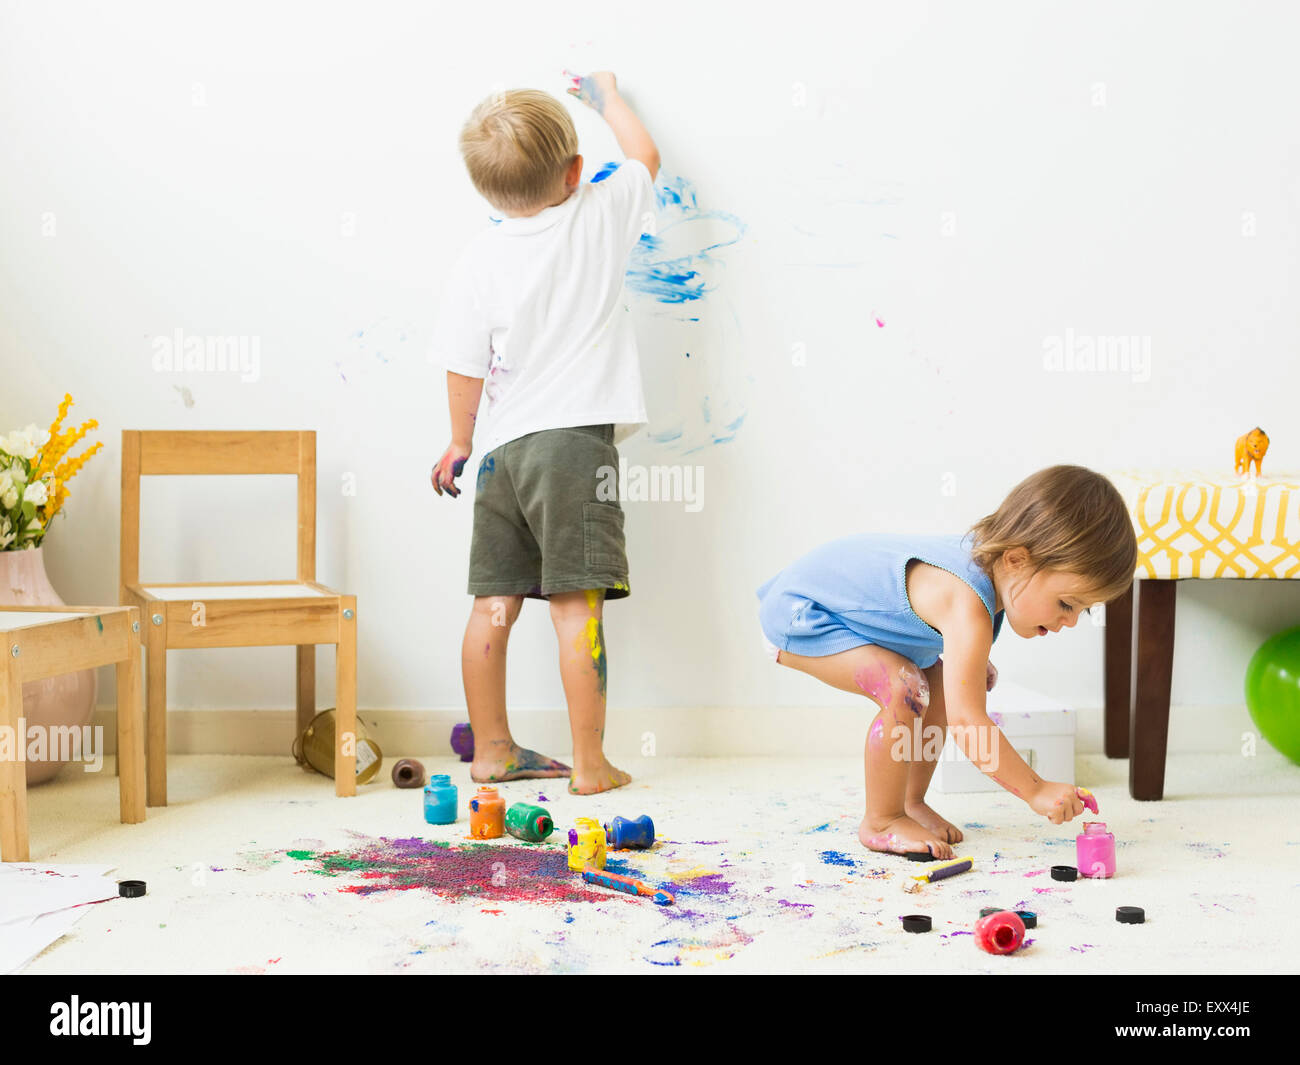 Children (2-3) painting on carpet and wall Stock Photo